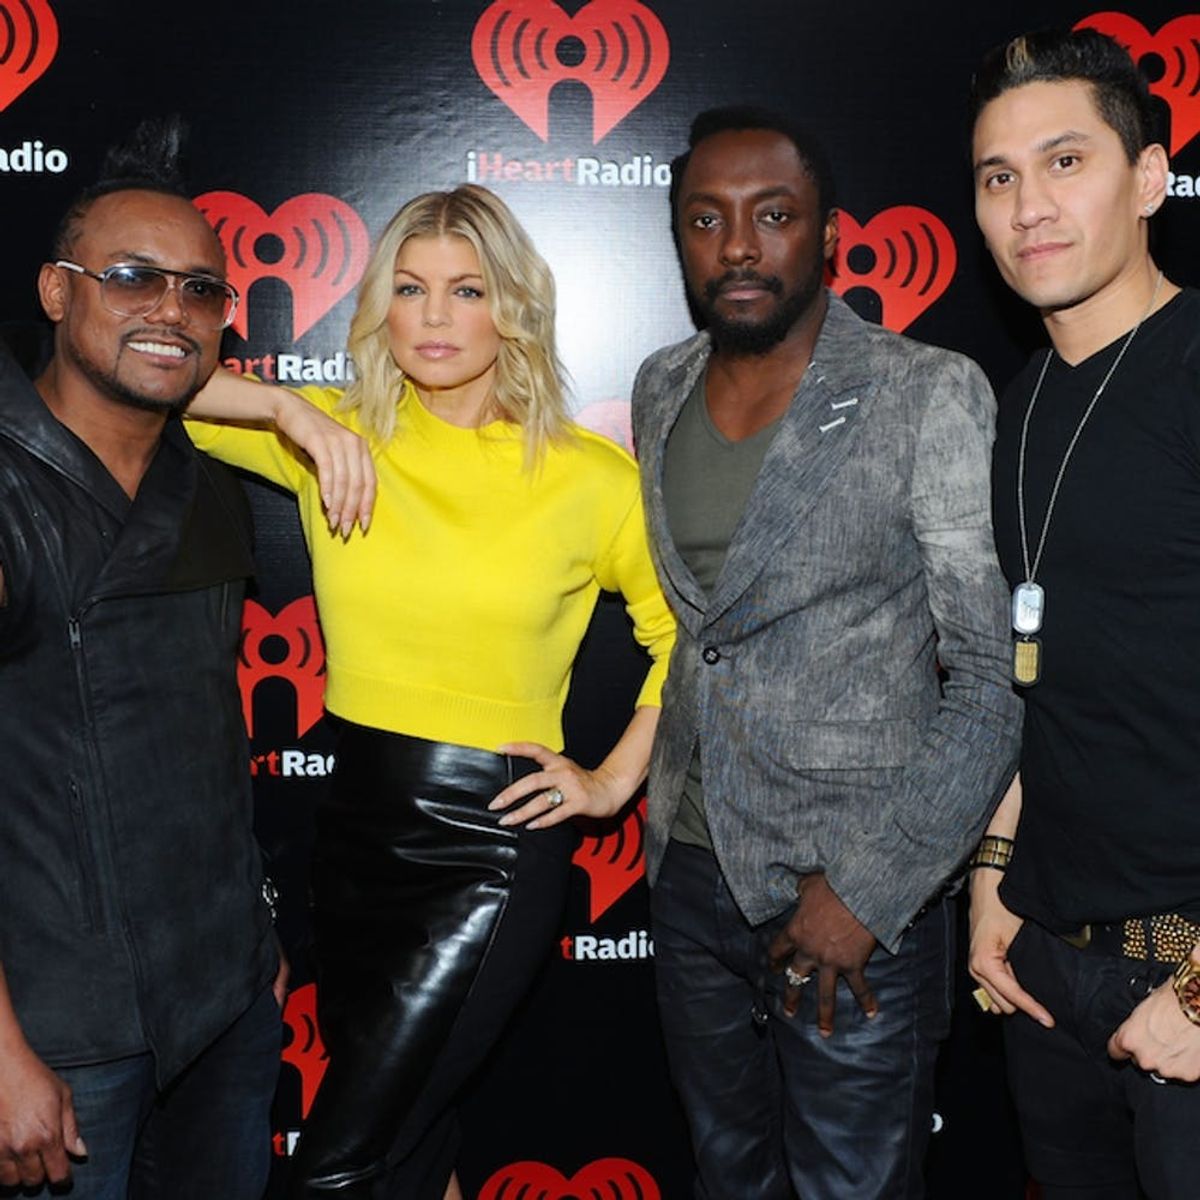 The Black Eyed Peas Just Gave One of Their Biggest Hits a Seriously Powerful Update